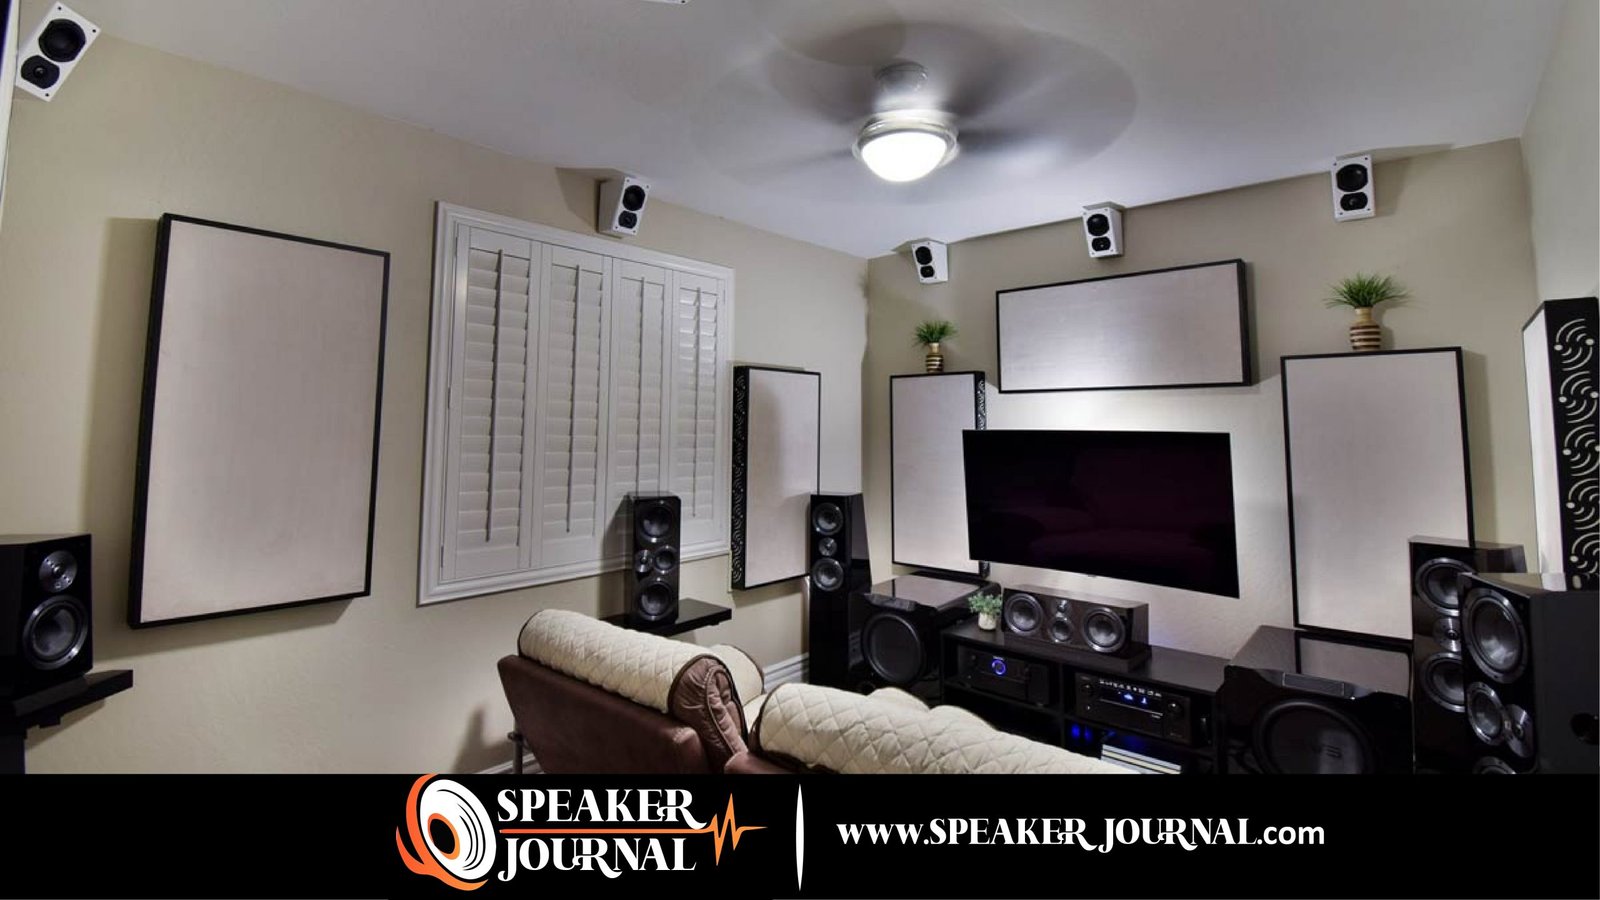 How to Connect Ceiling Speakers to Receiver by speakerjournal.com